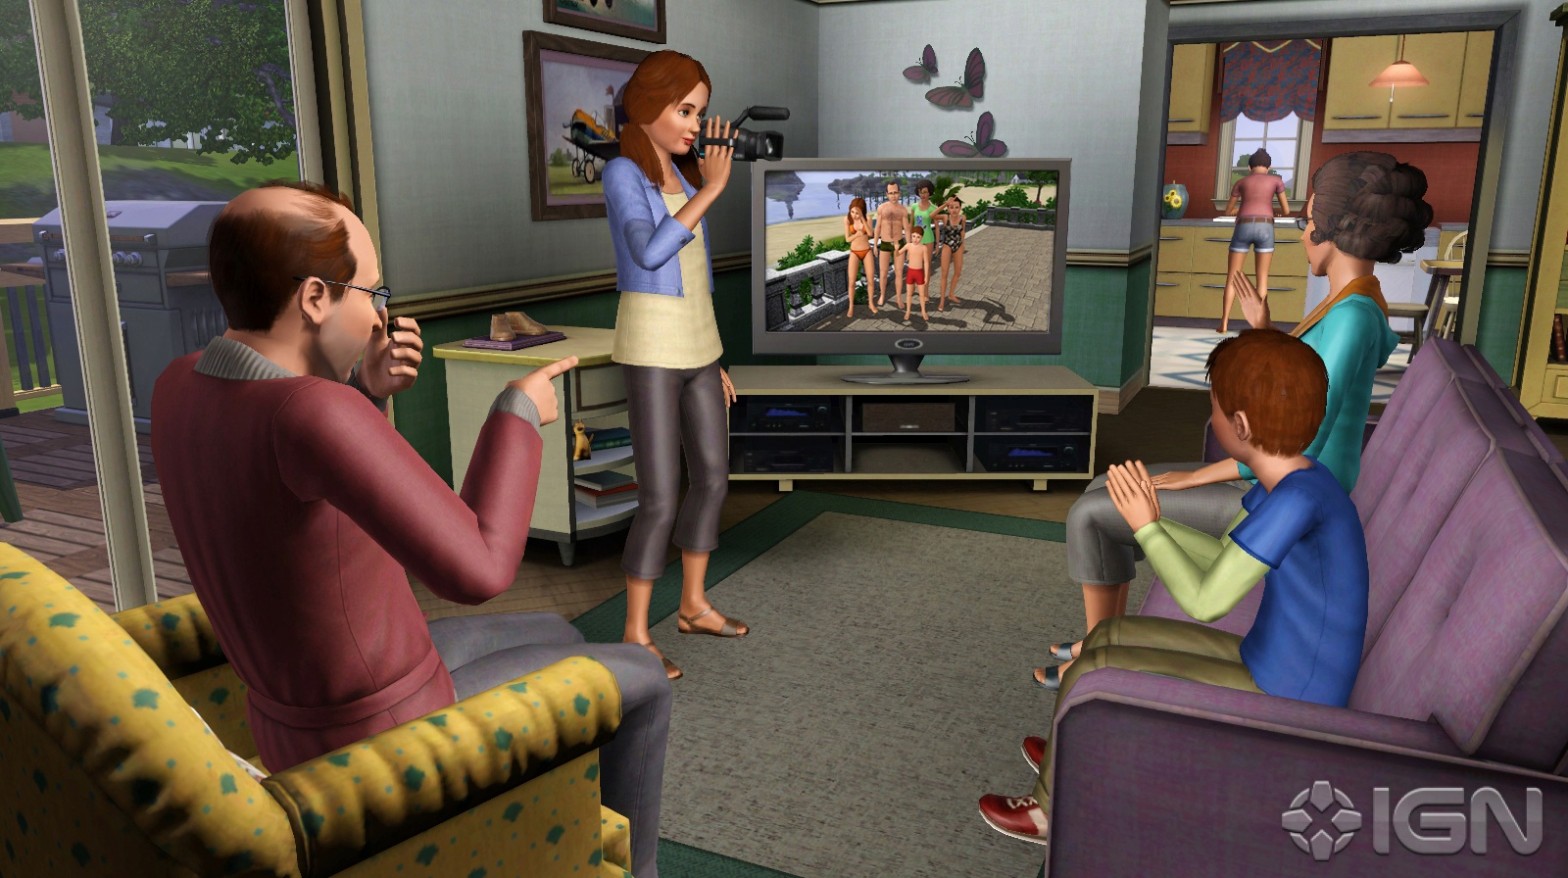 what is sims 3 generations